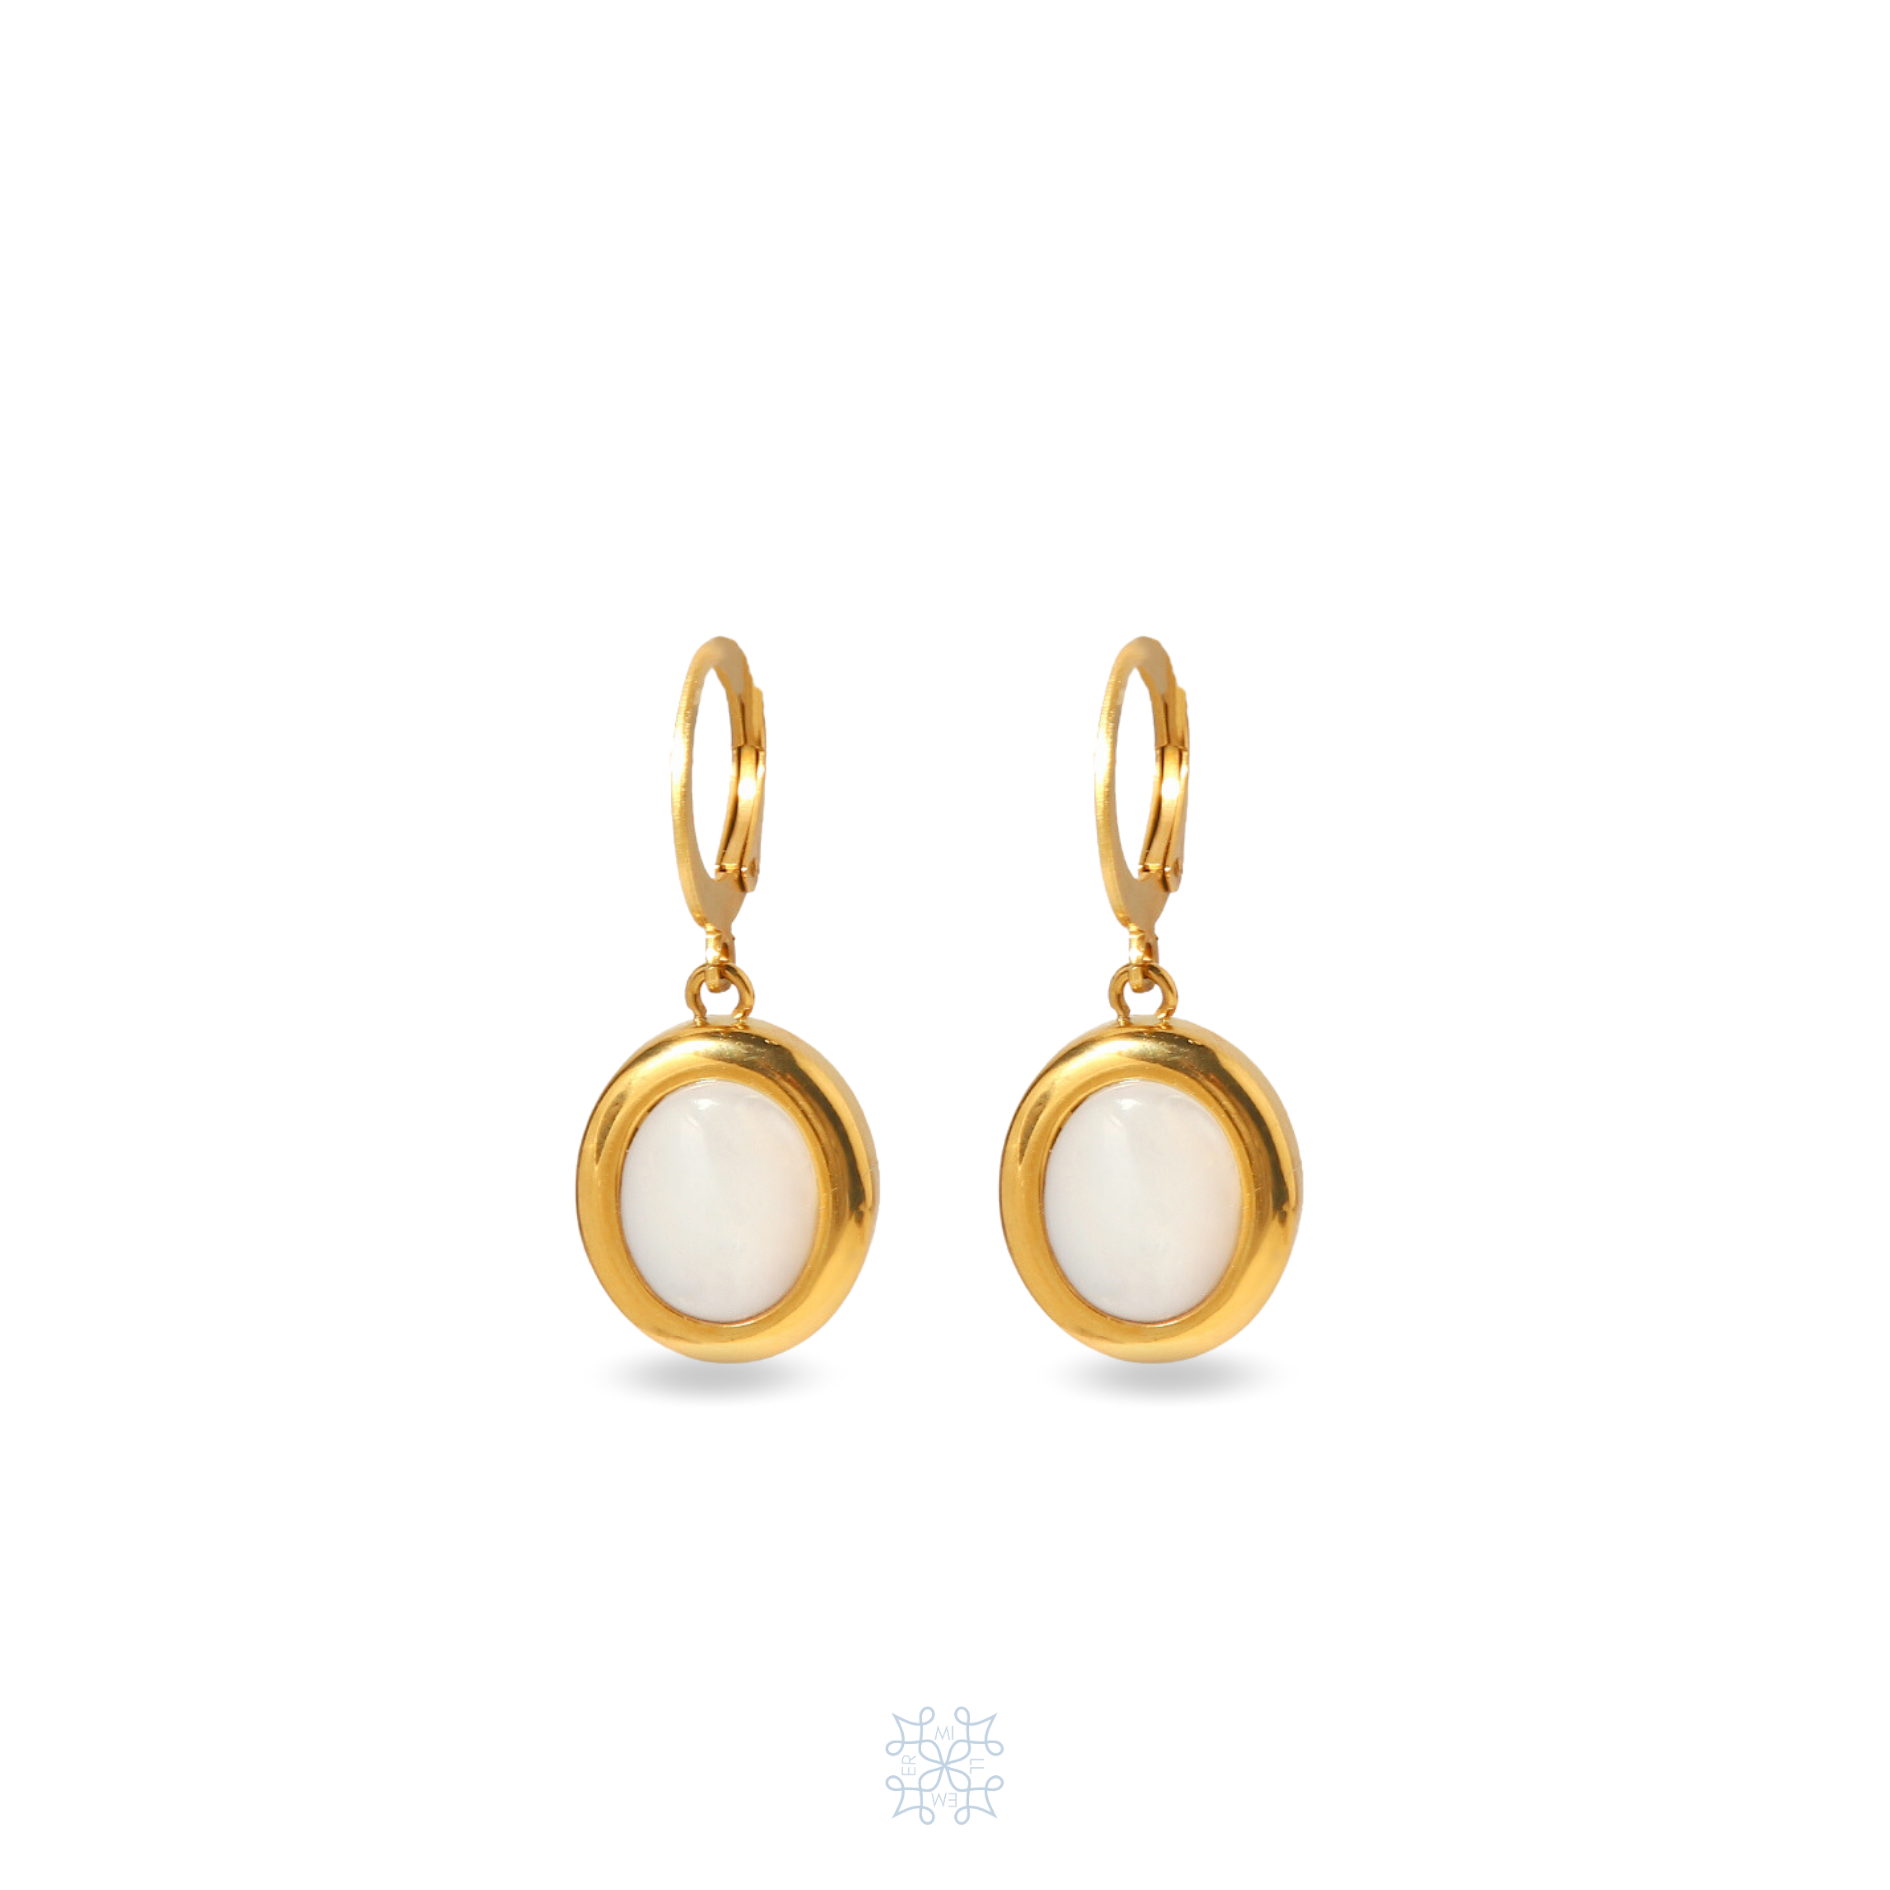 Gold hoop earrings with oval mother pearl drop.